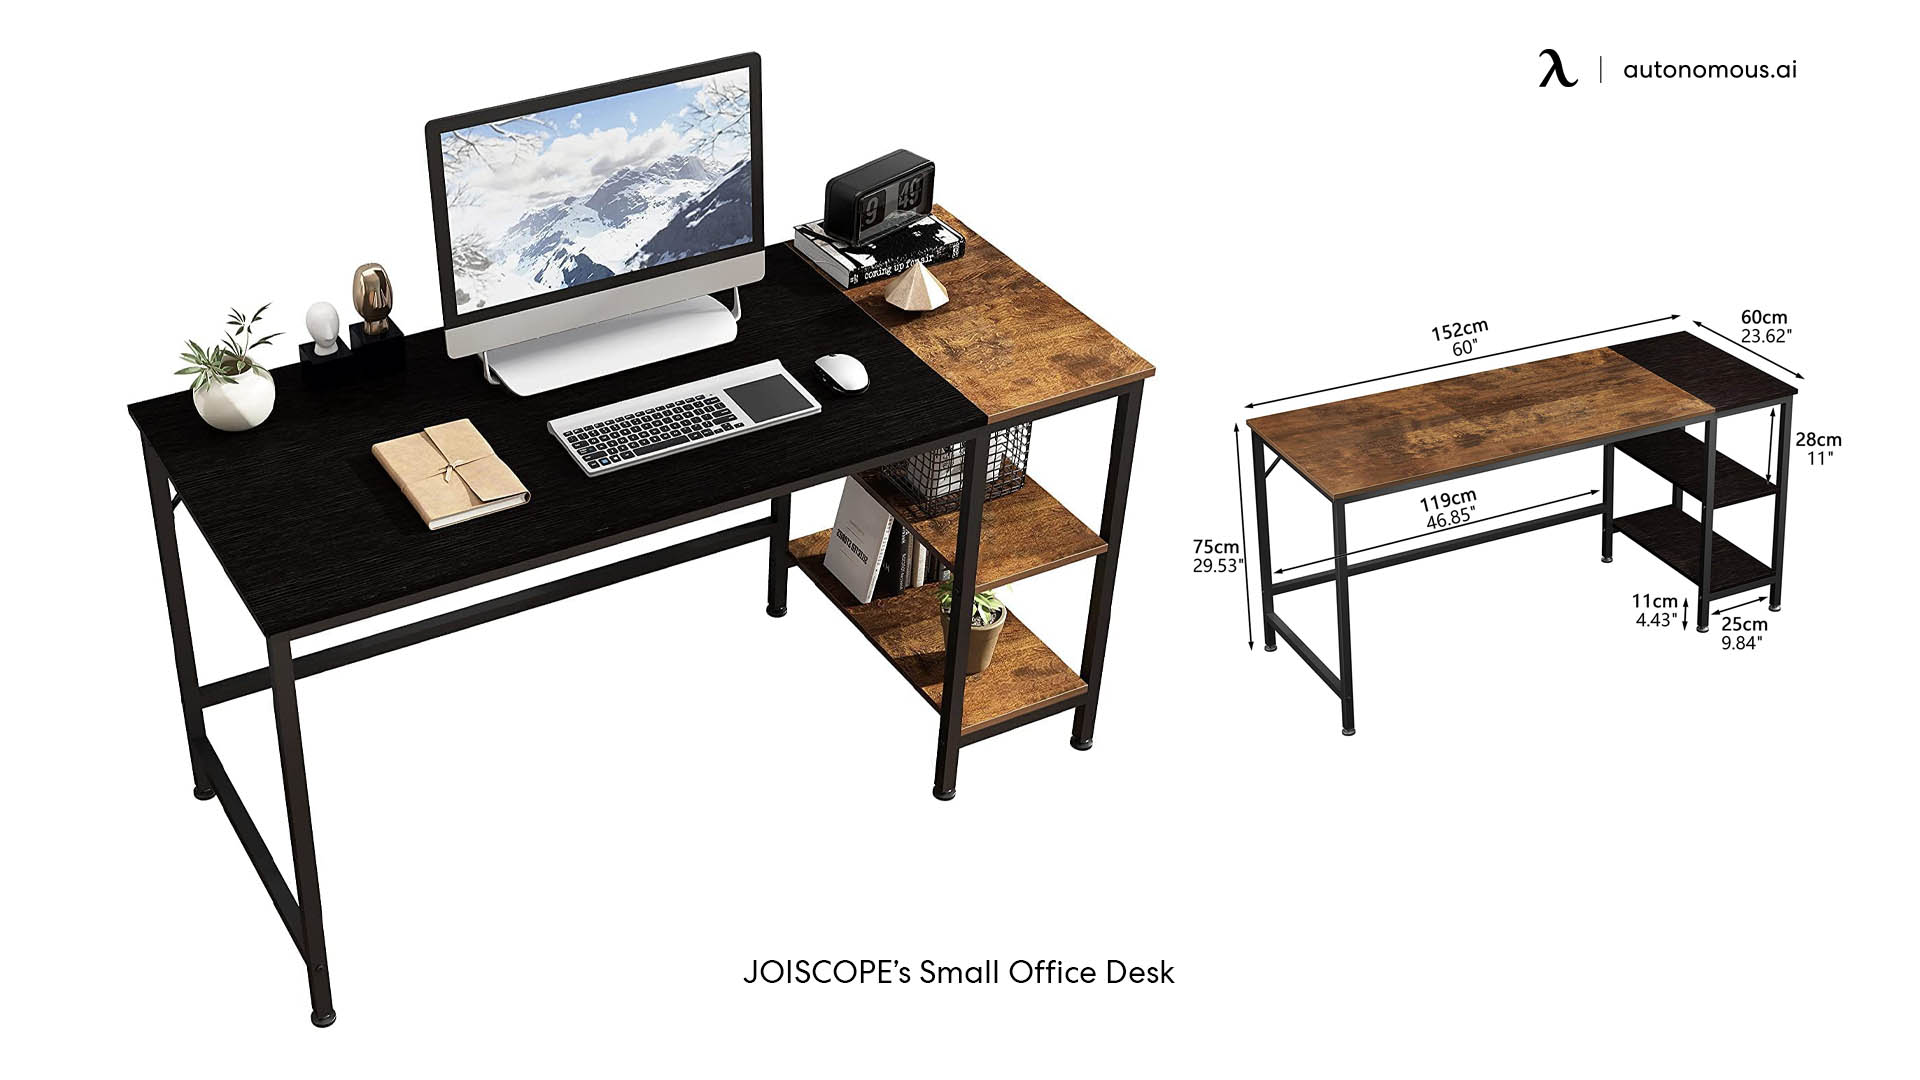 JOISCOPE’s Small Office Desk